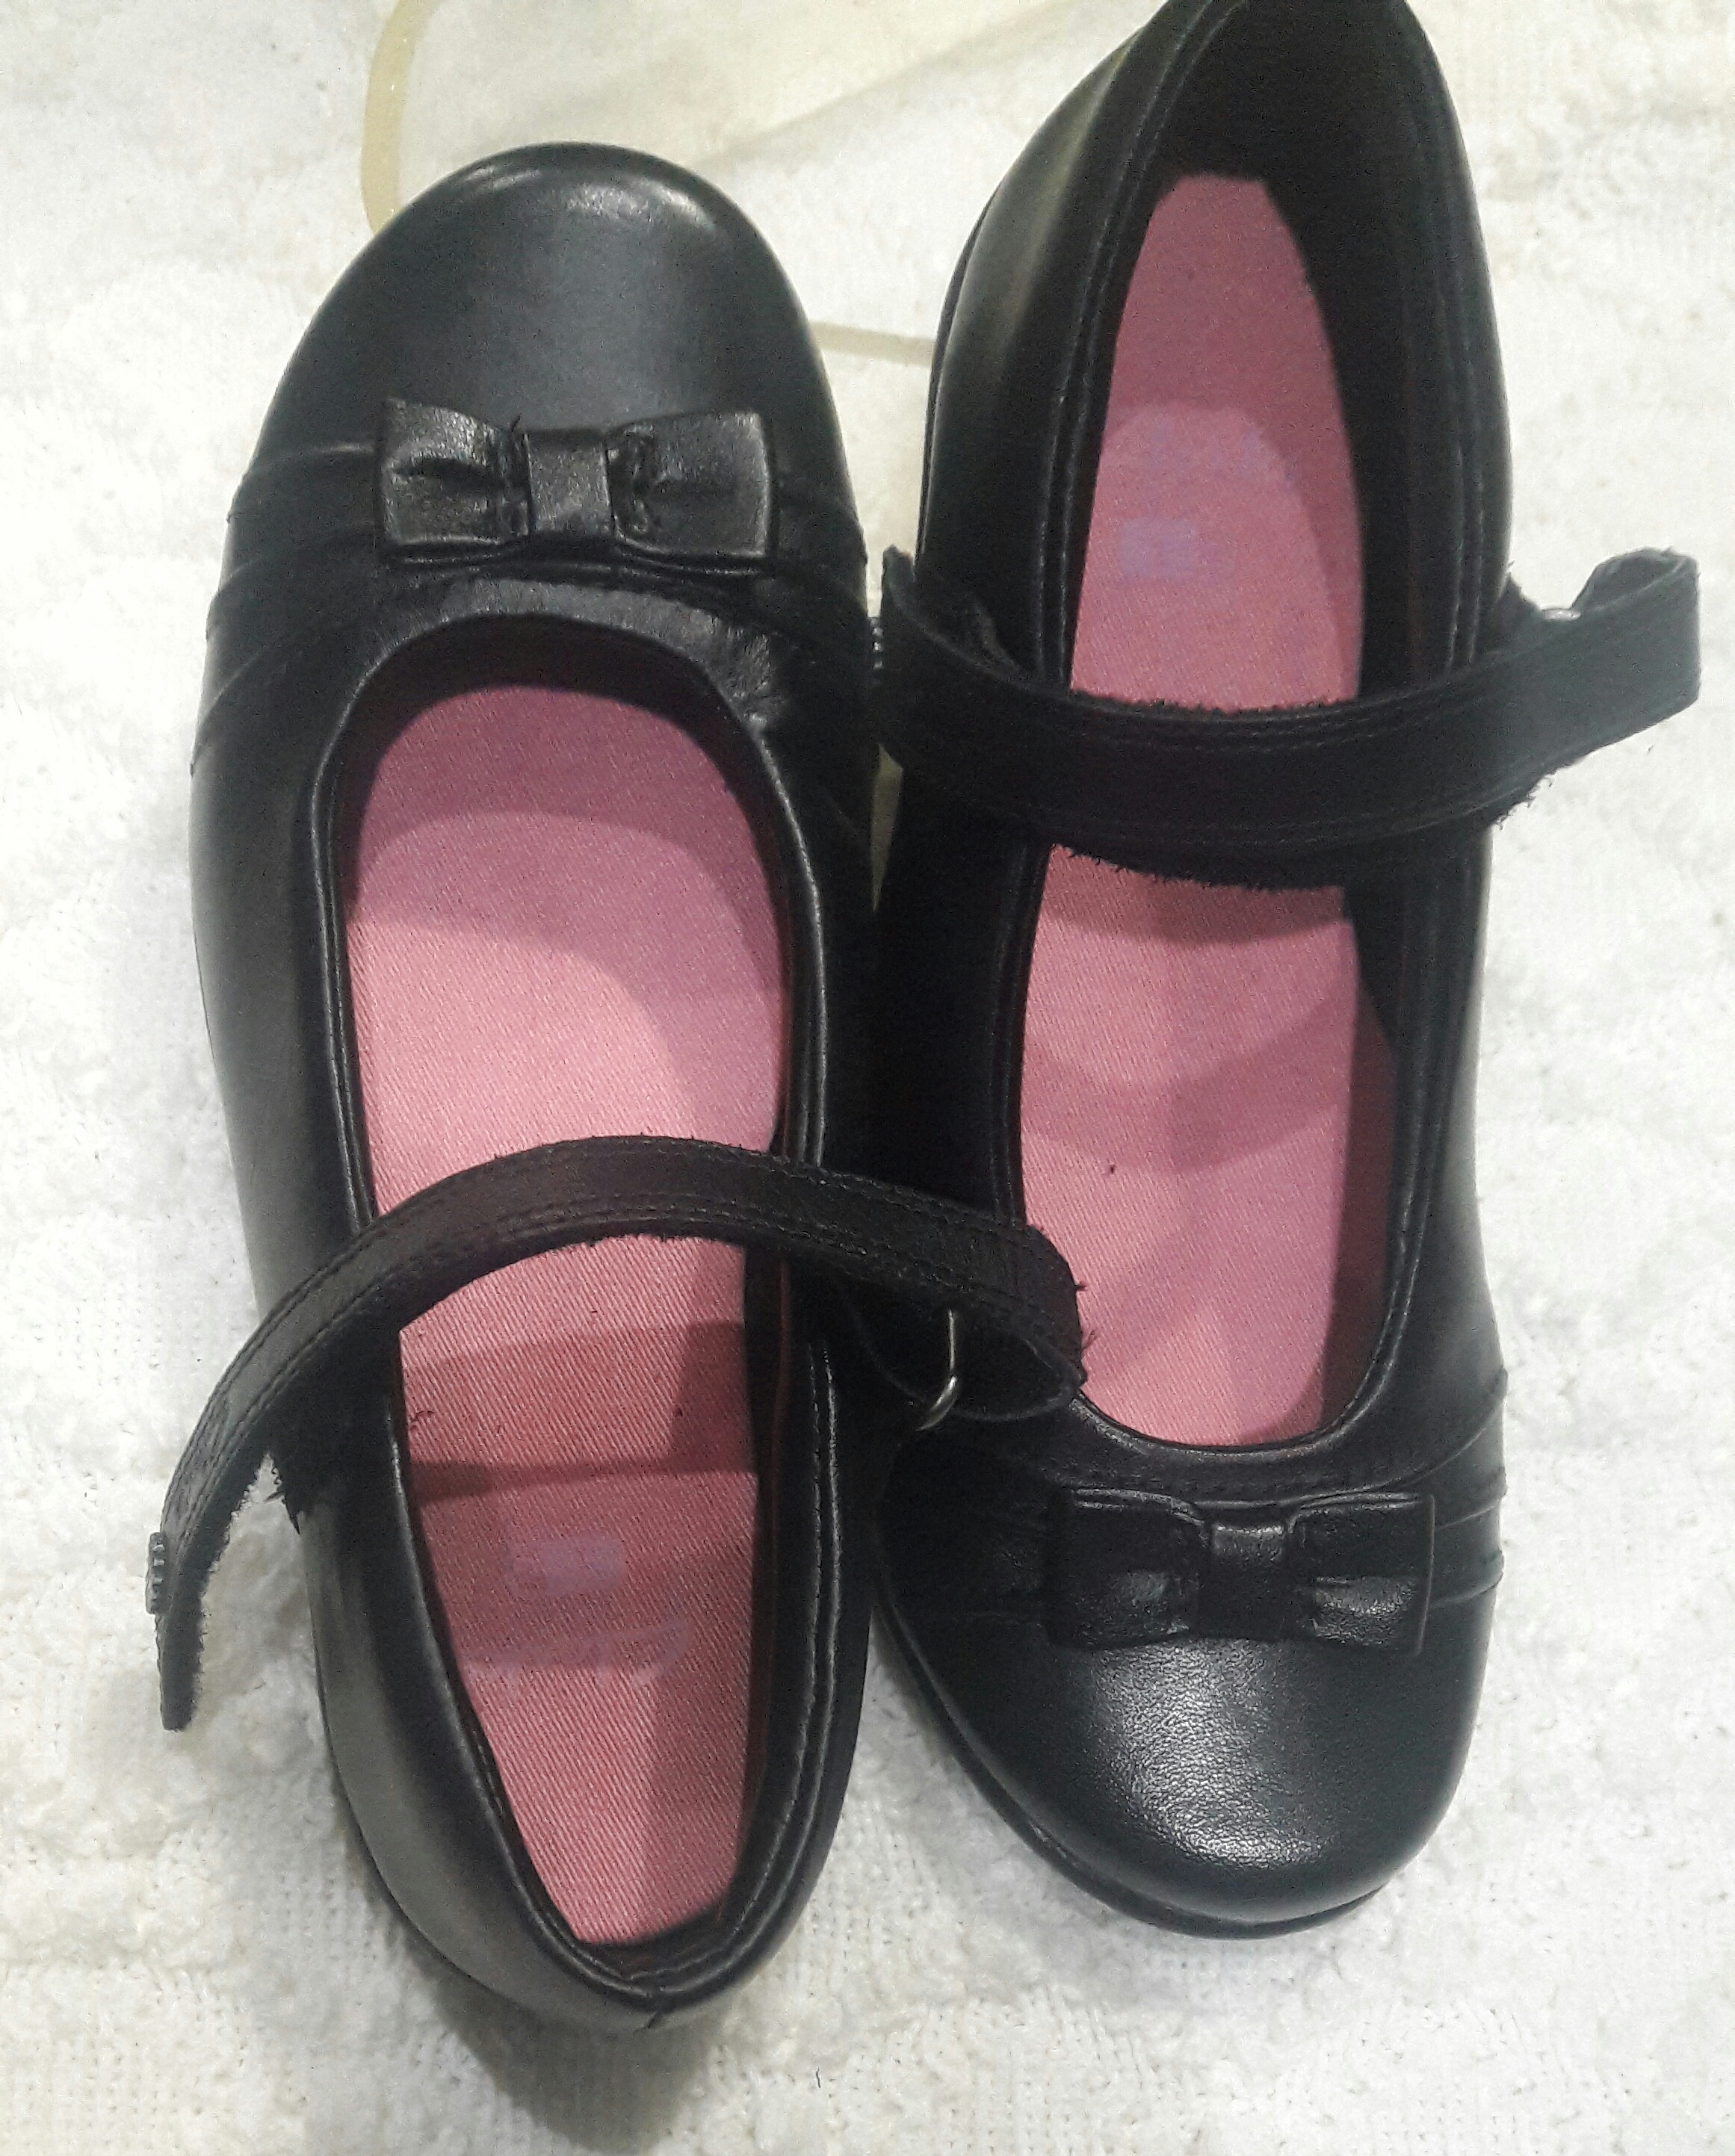 clarks baby shoes sale